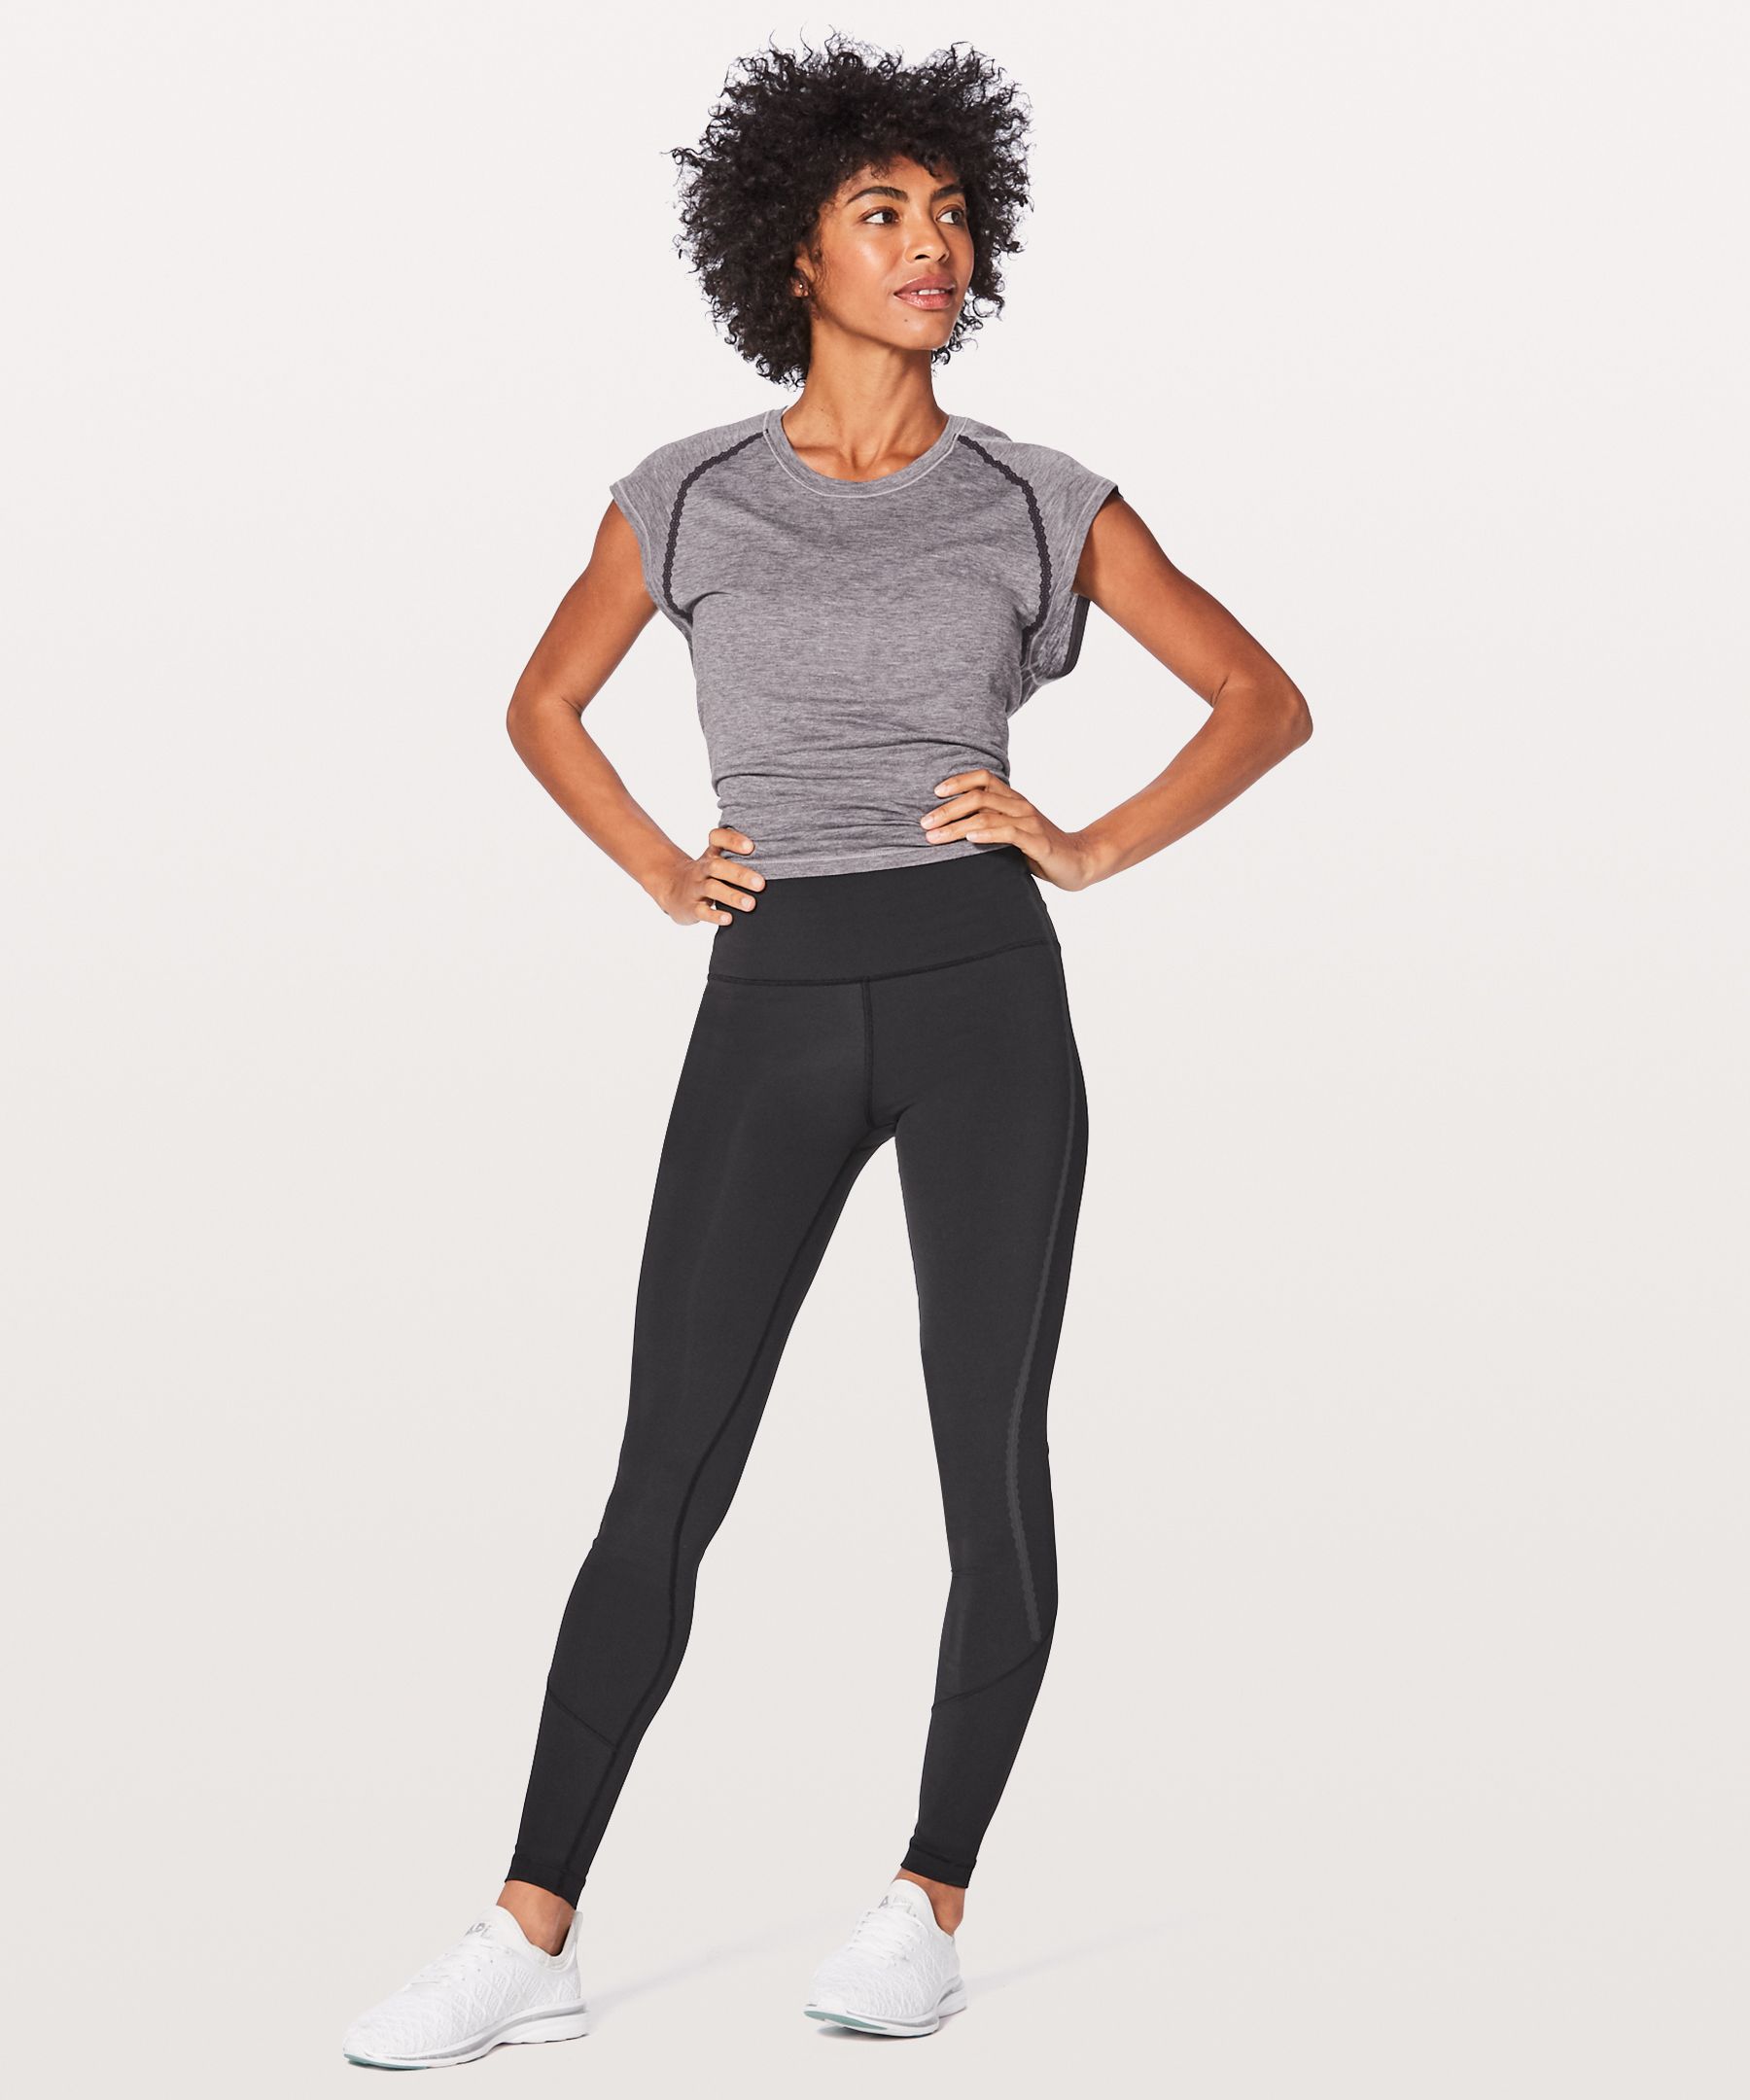 lululemon Trends Weekly Product Drops